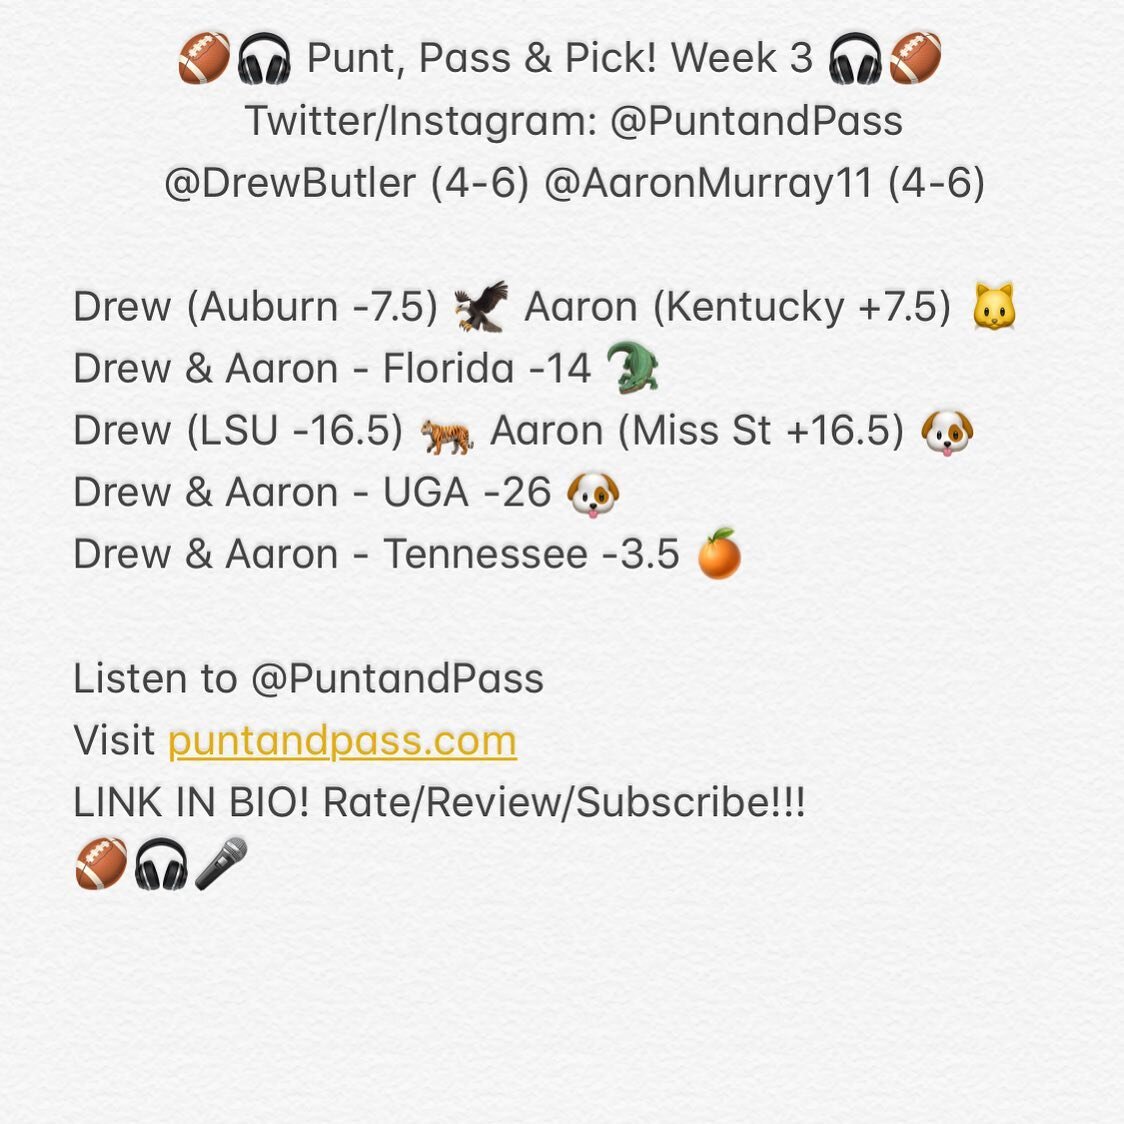 Punt, Pass &amp; Pick Week 3! 🎧🏈
#SECKickoff Weekend 🙌🏼
Chalky for @drewbutler - some surprises from @aaronmurray11 😲
Let&rsquo;s see who has more winners! 🤑
Visit PuntandPass.com for more 👍🏻